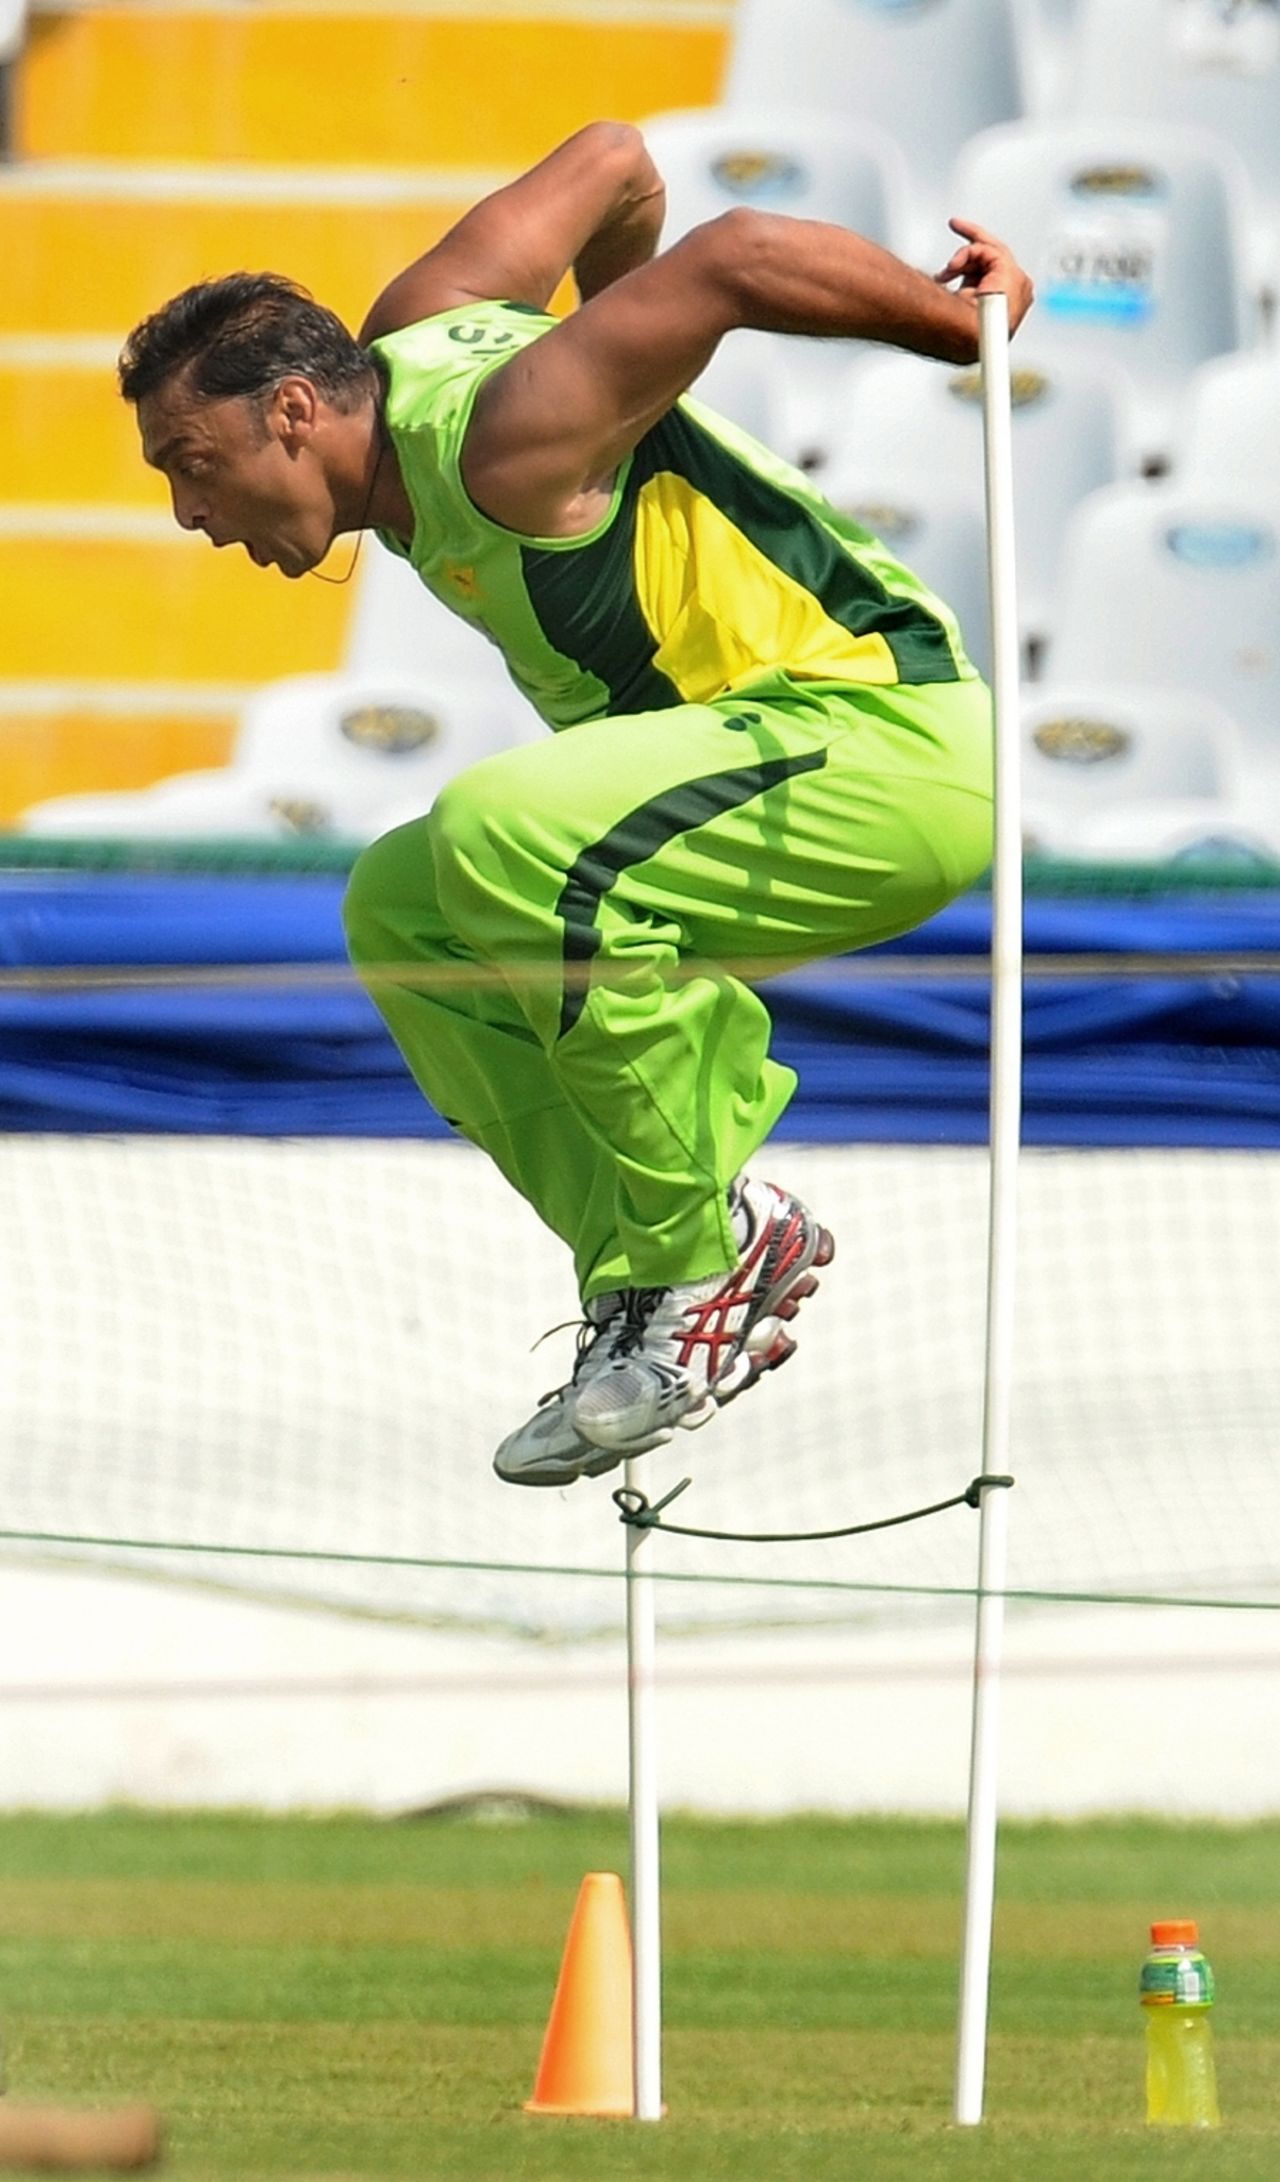 Shoaib Akhtar jumps over a hurdle during a training session , Mohali, World Cup 2011, March 26, 2011 